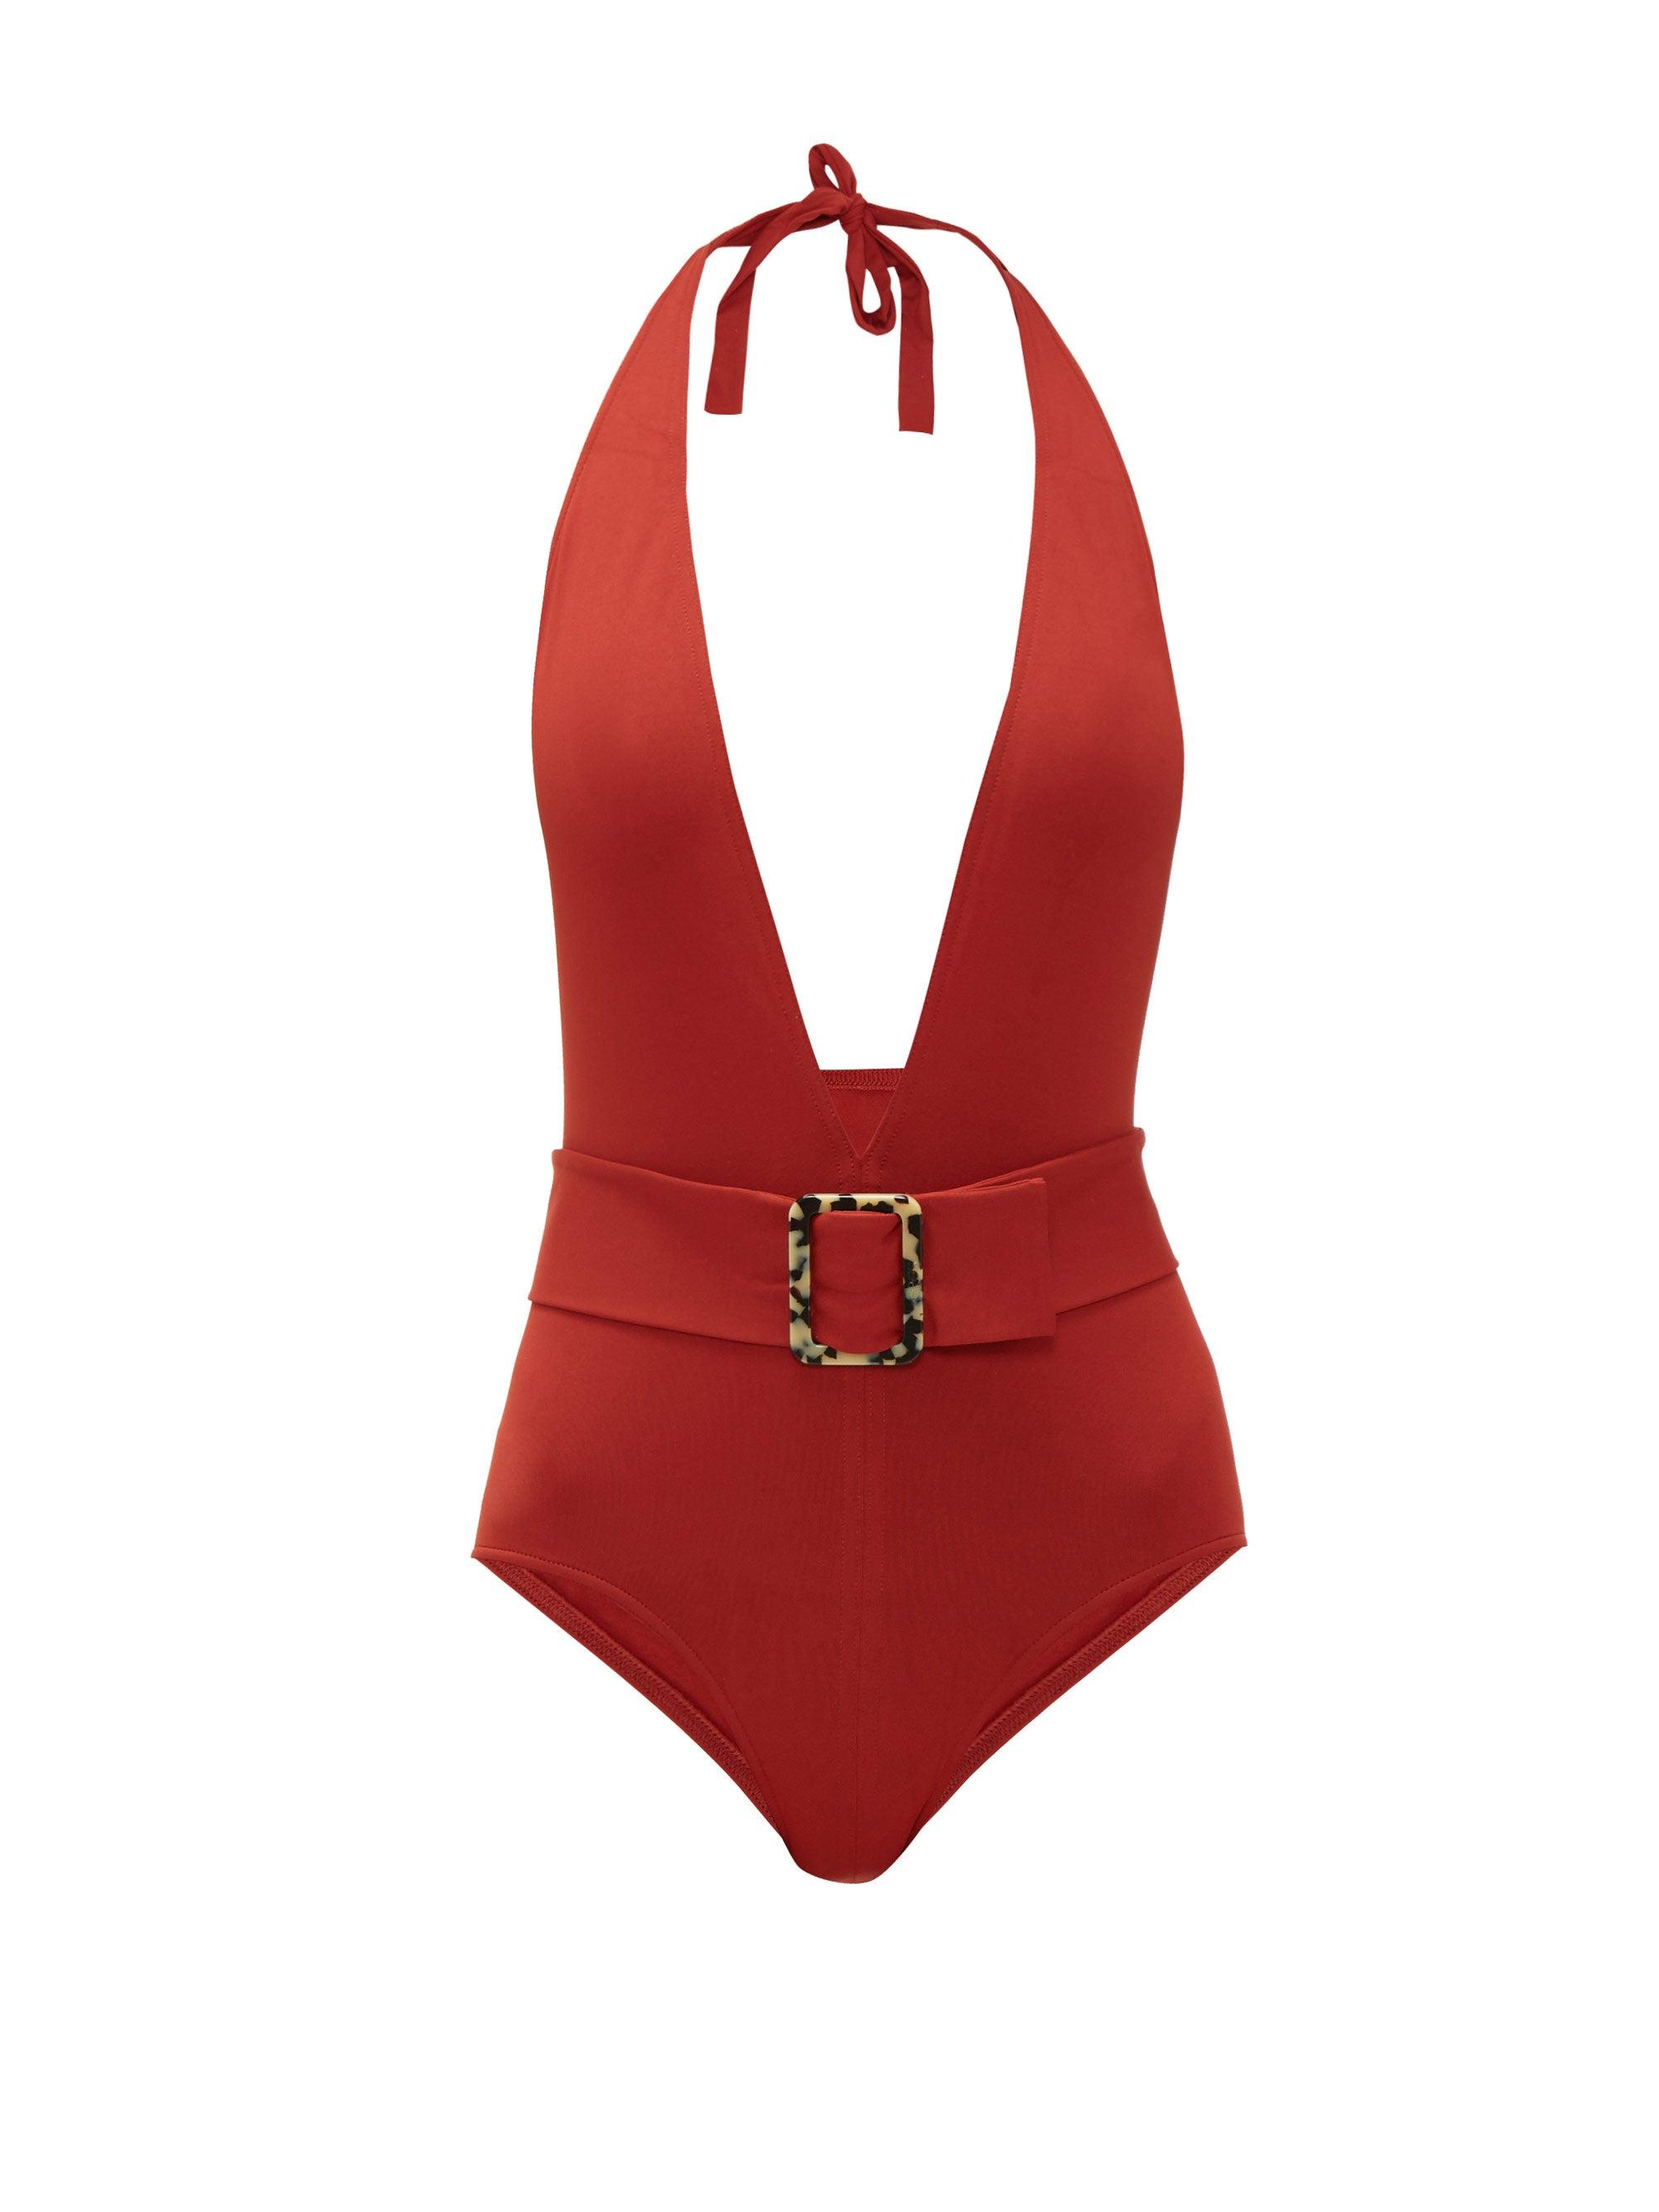 Eres Affairs Belted Halterneck Swimsuit in Red - Lyst